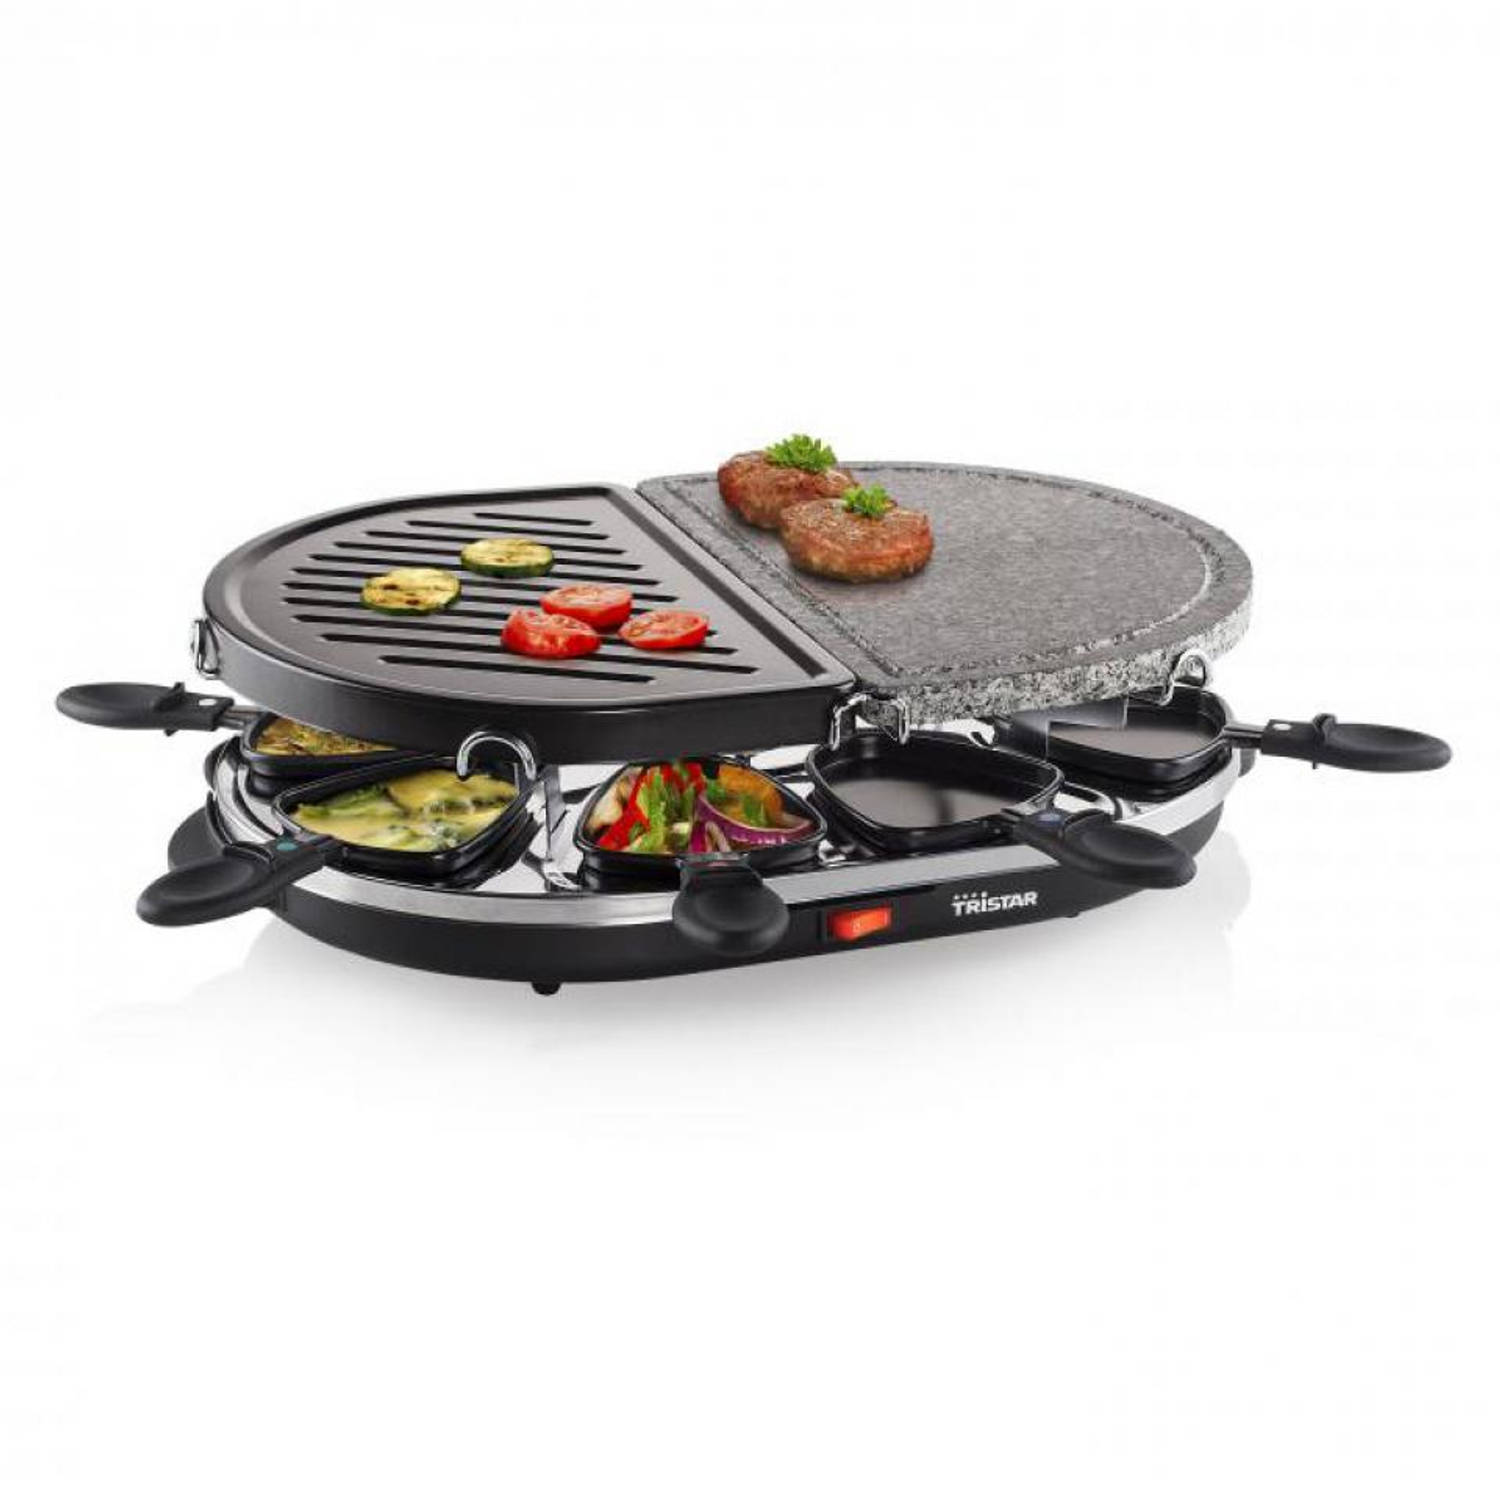 Tristar raclette steengrill ra-2946